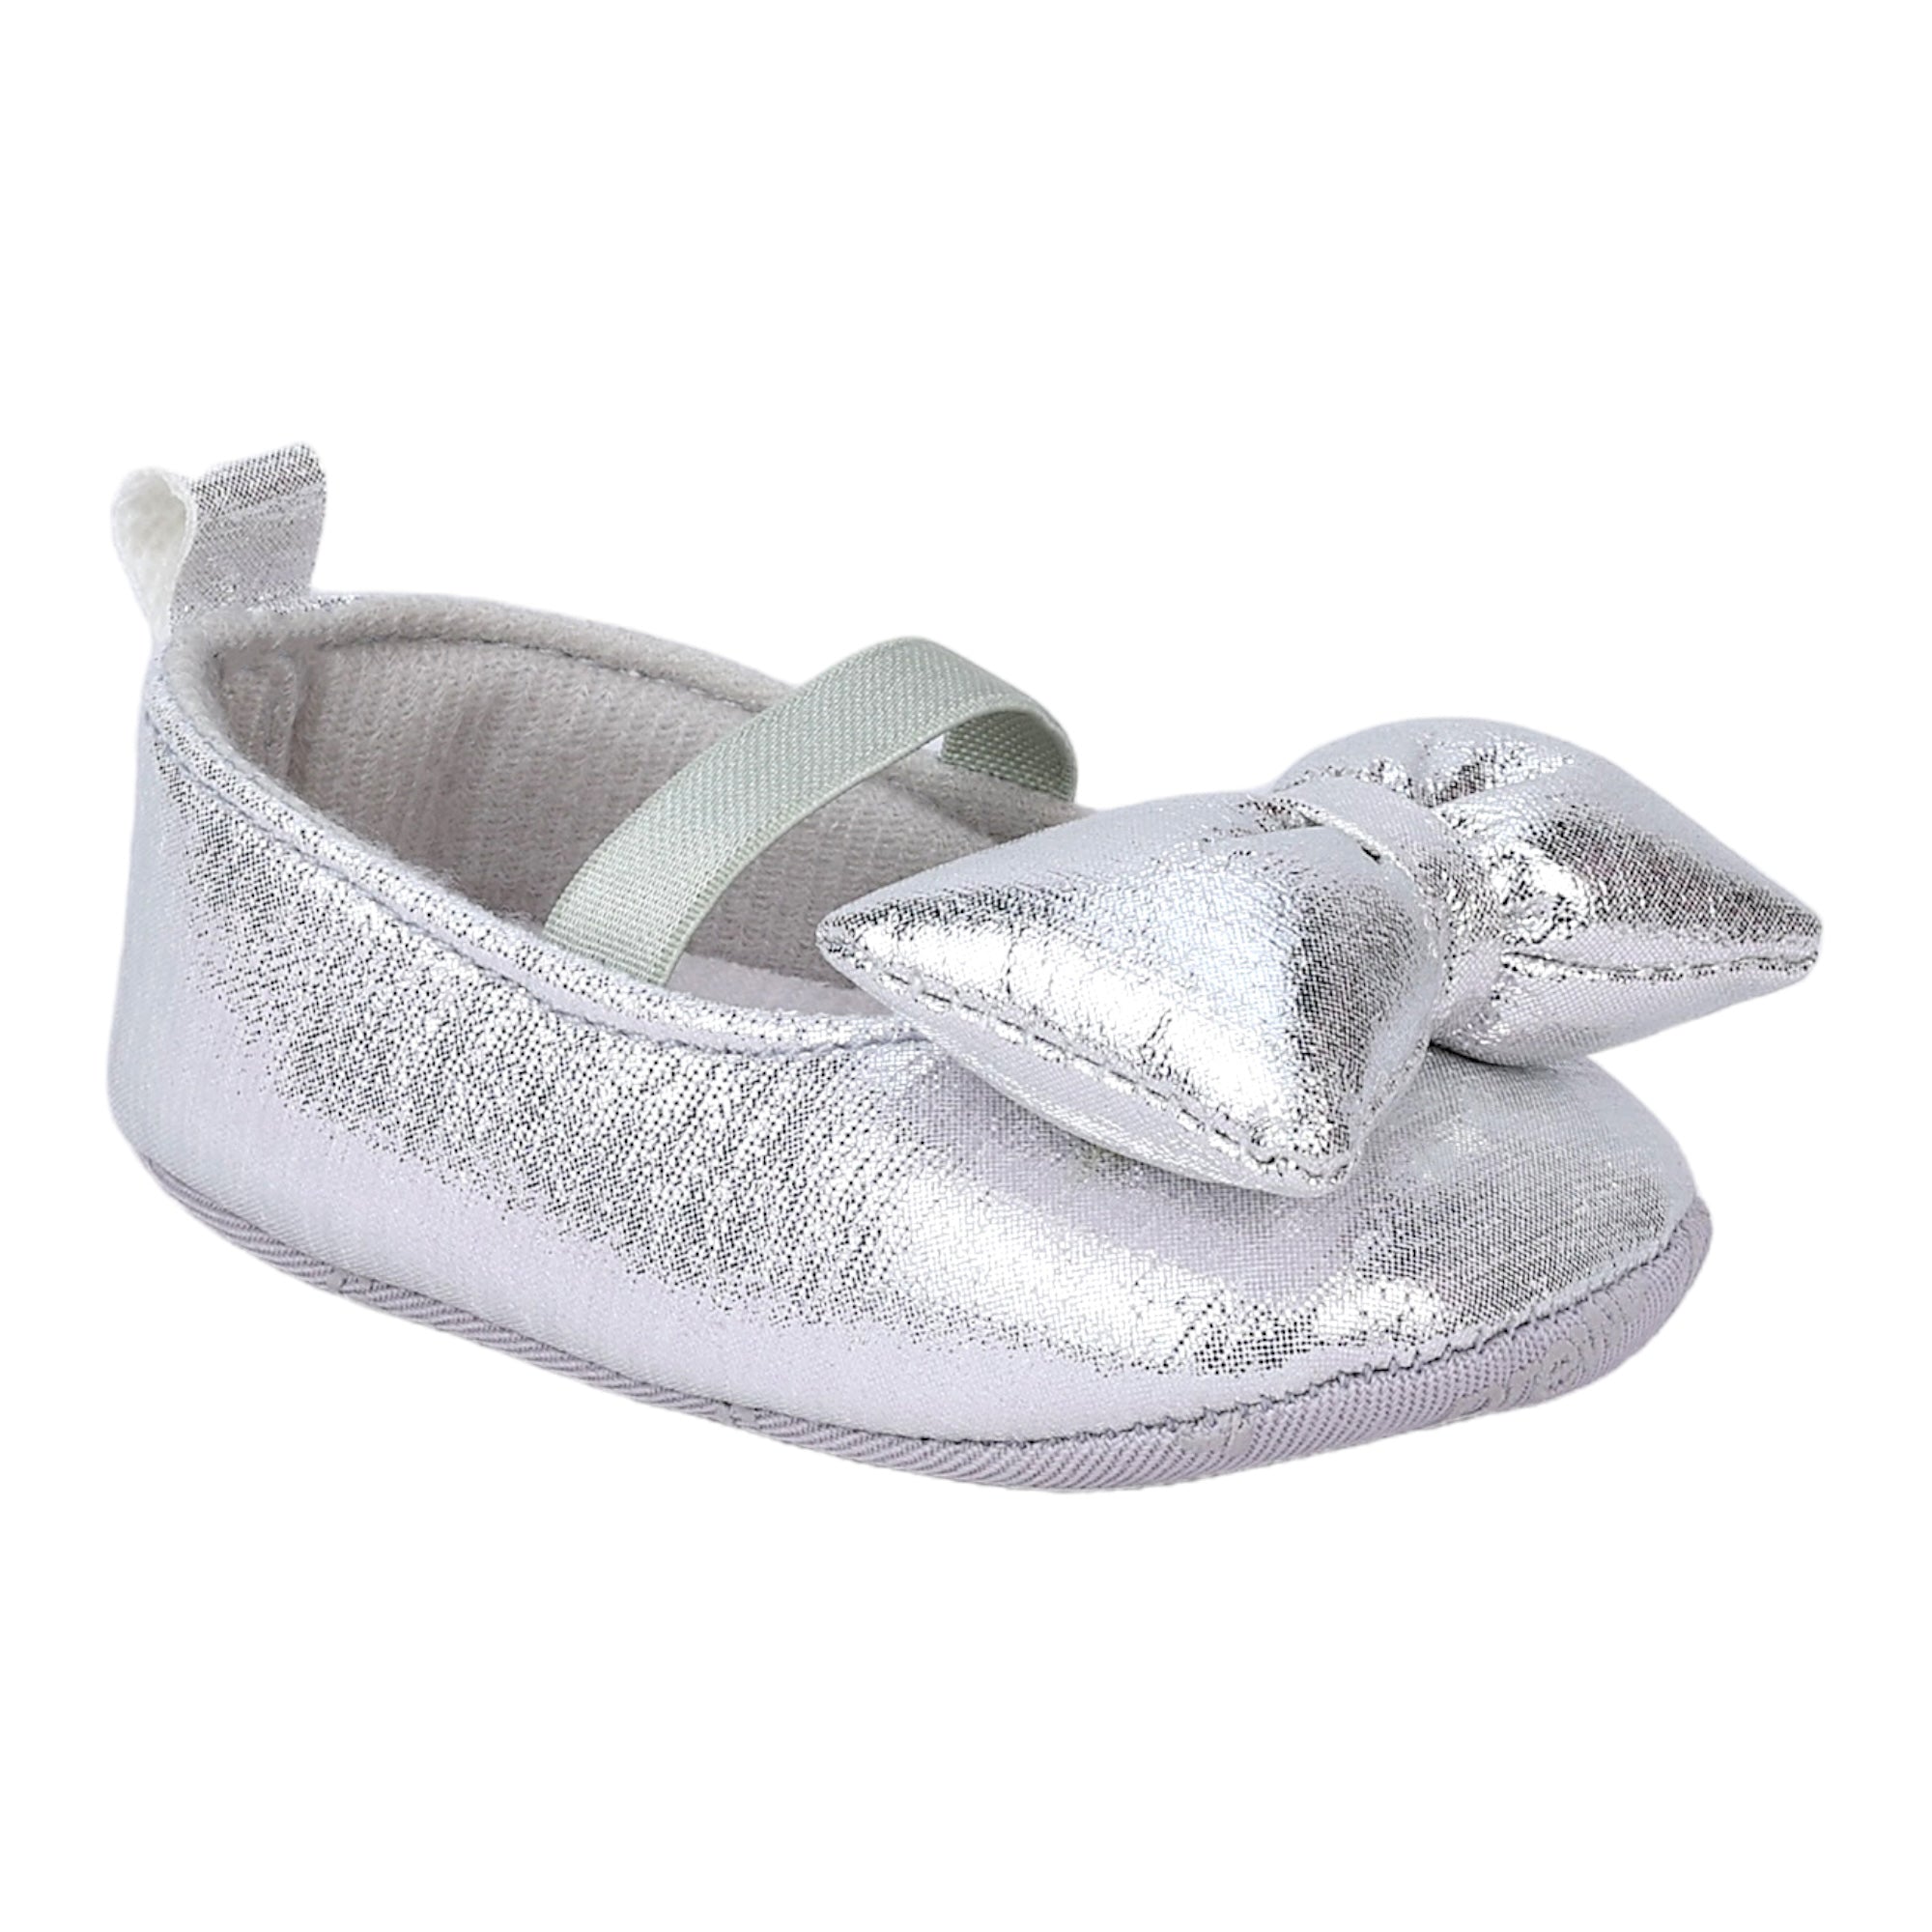 Baby Moo Partywear Shiny Bow Elastic Strap Anti-Skid Ballerina Booties - Silver